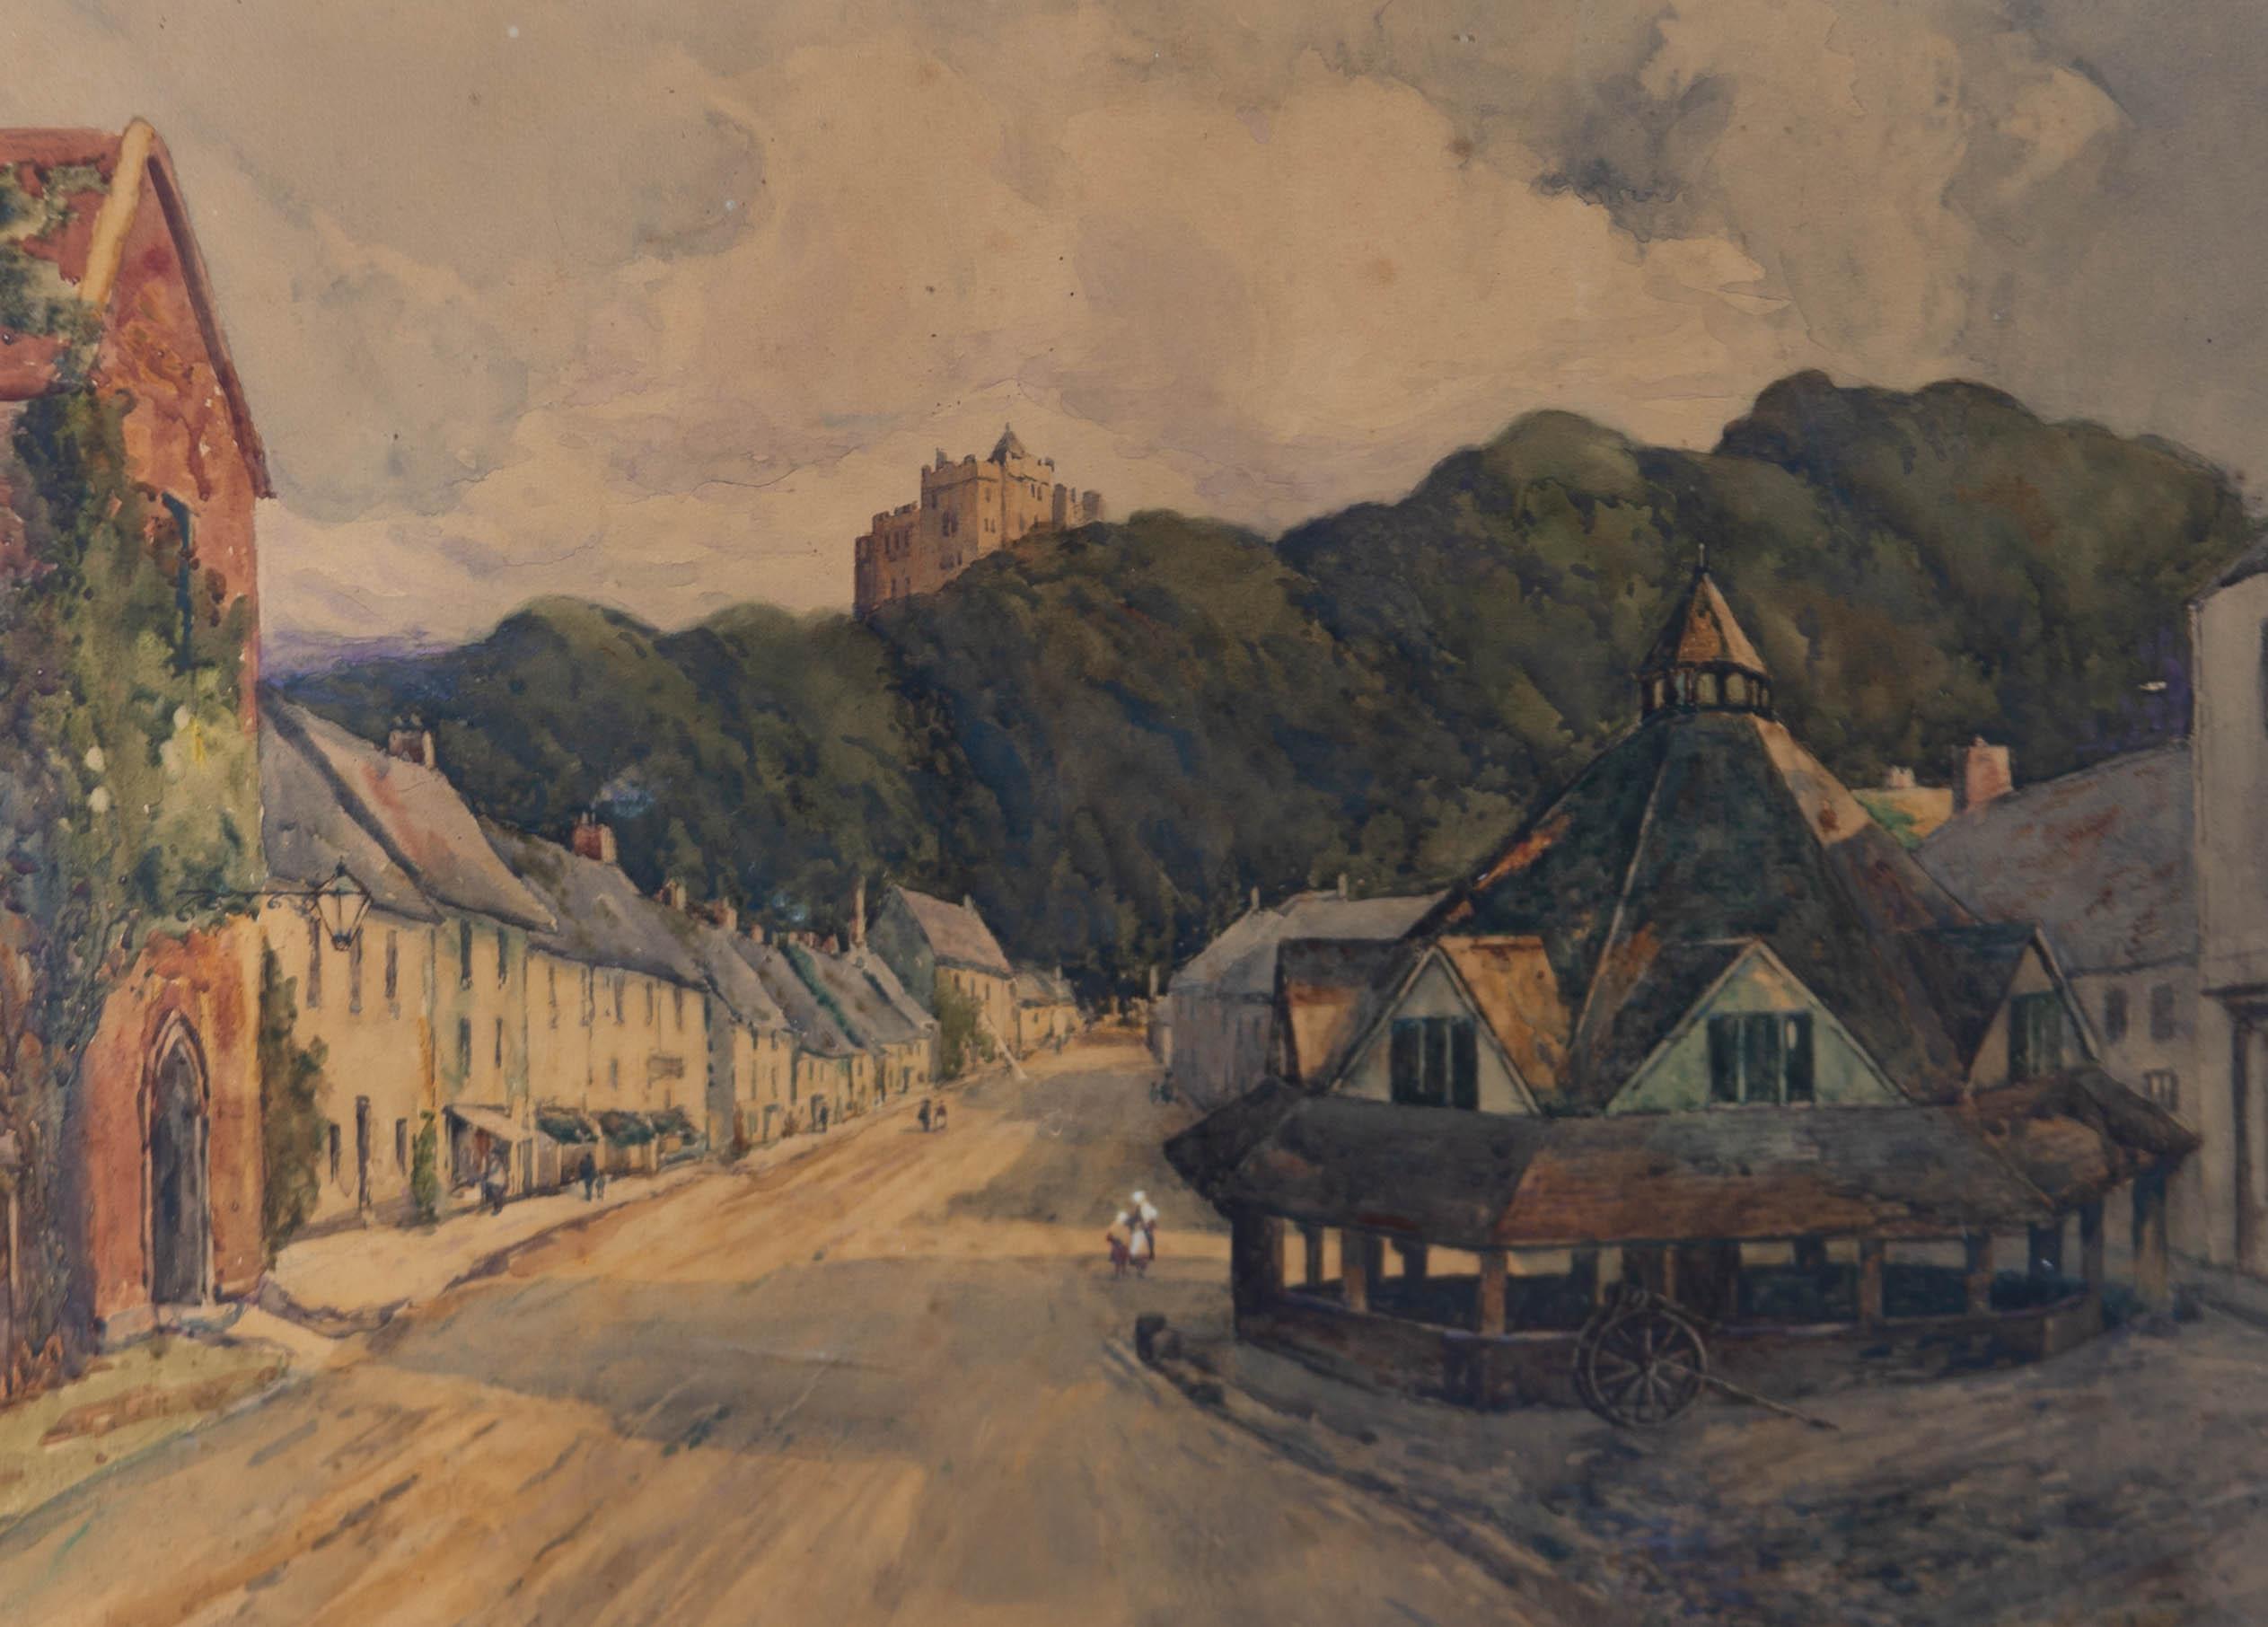 Attrib. W.H. Sweet (1889-1943) - Framed Early 20th Century Watercolour, Dunster 1